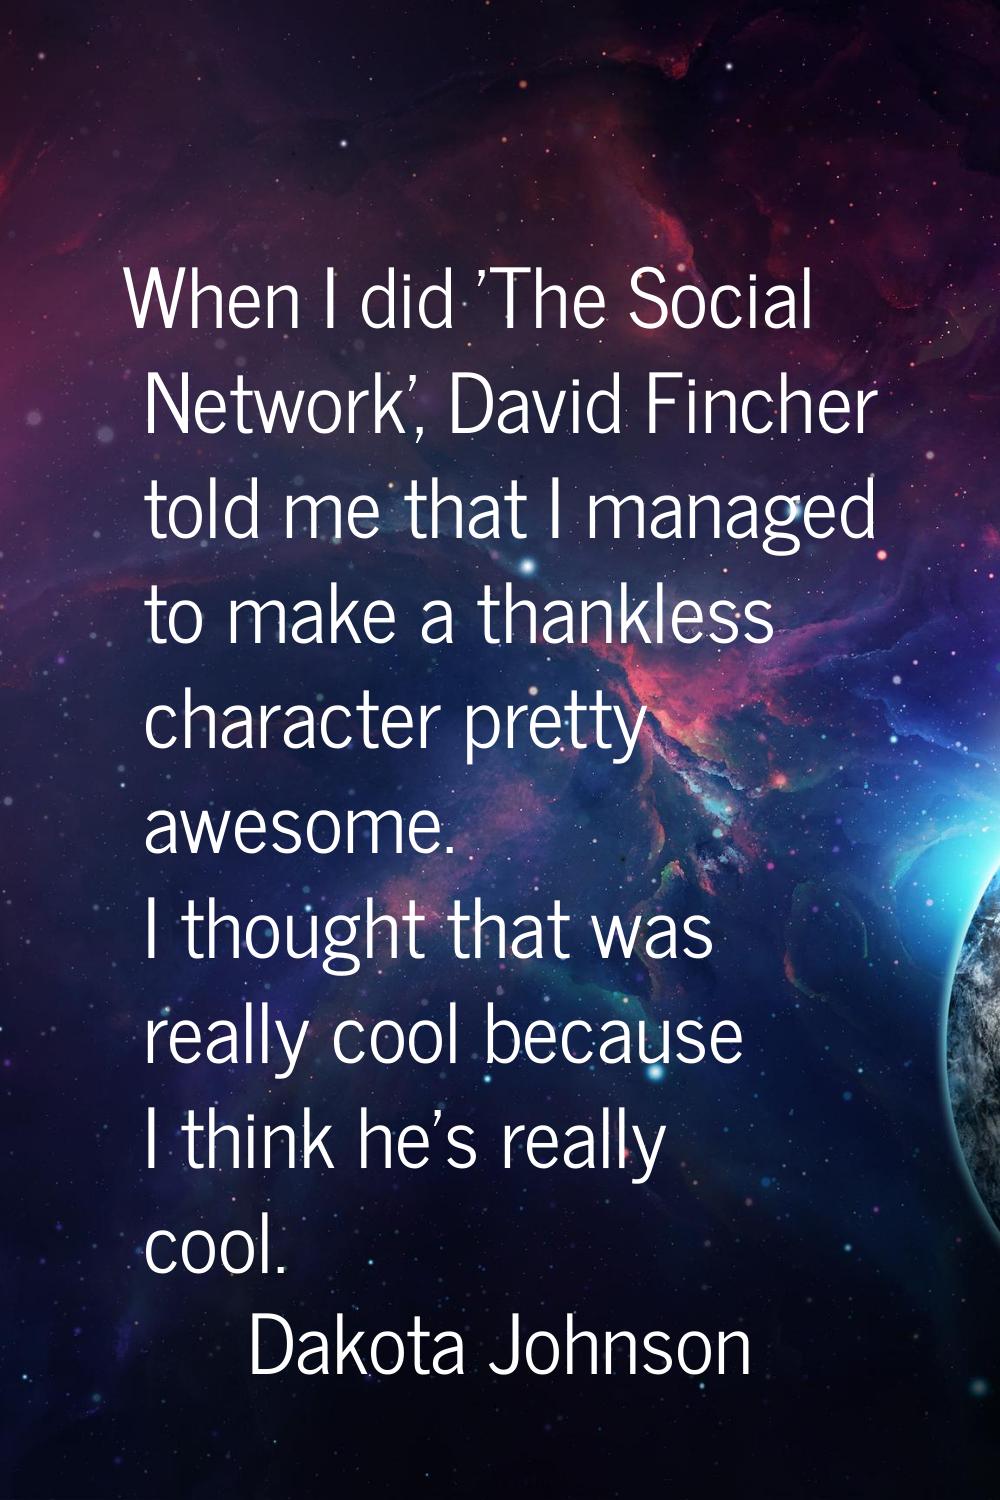 When I did 'The Social Network', David Fincher told me that I managed to make a thankless character